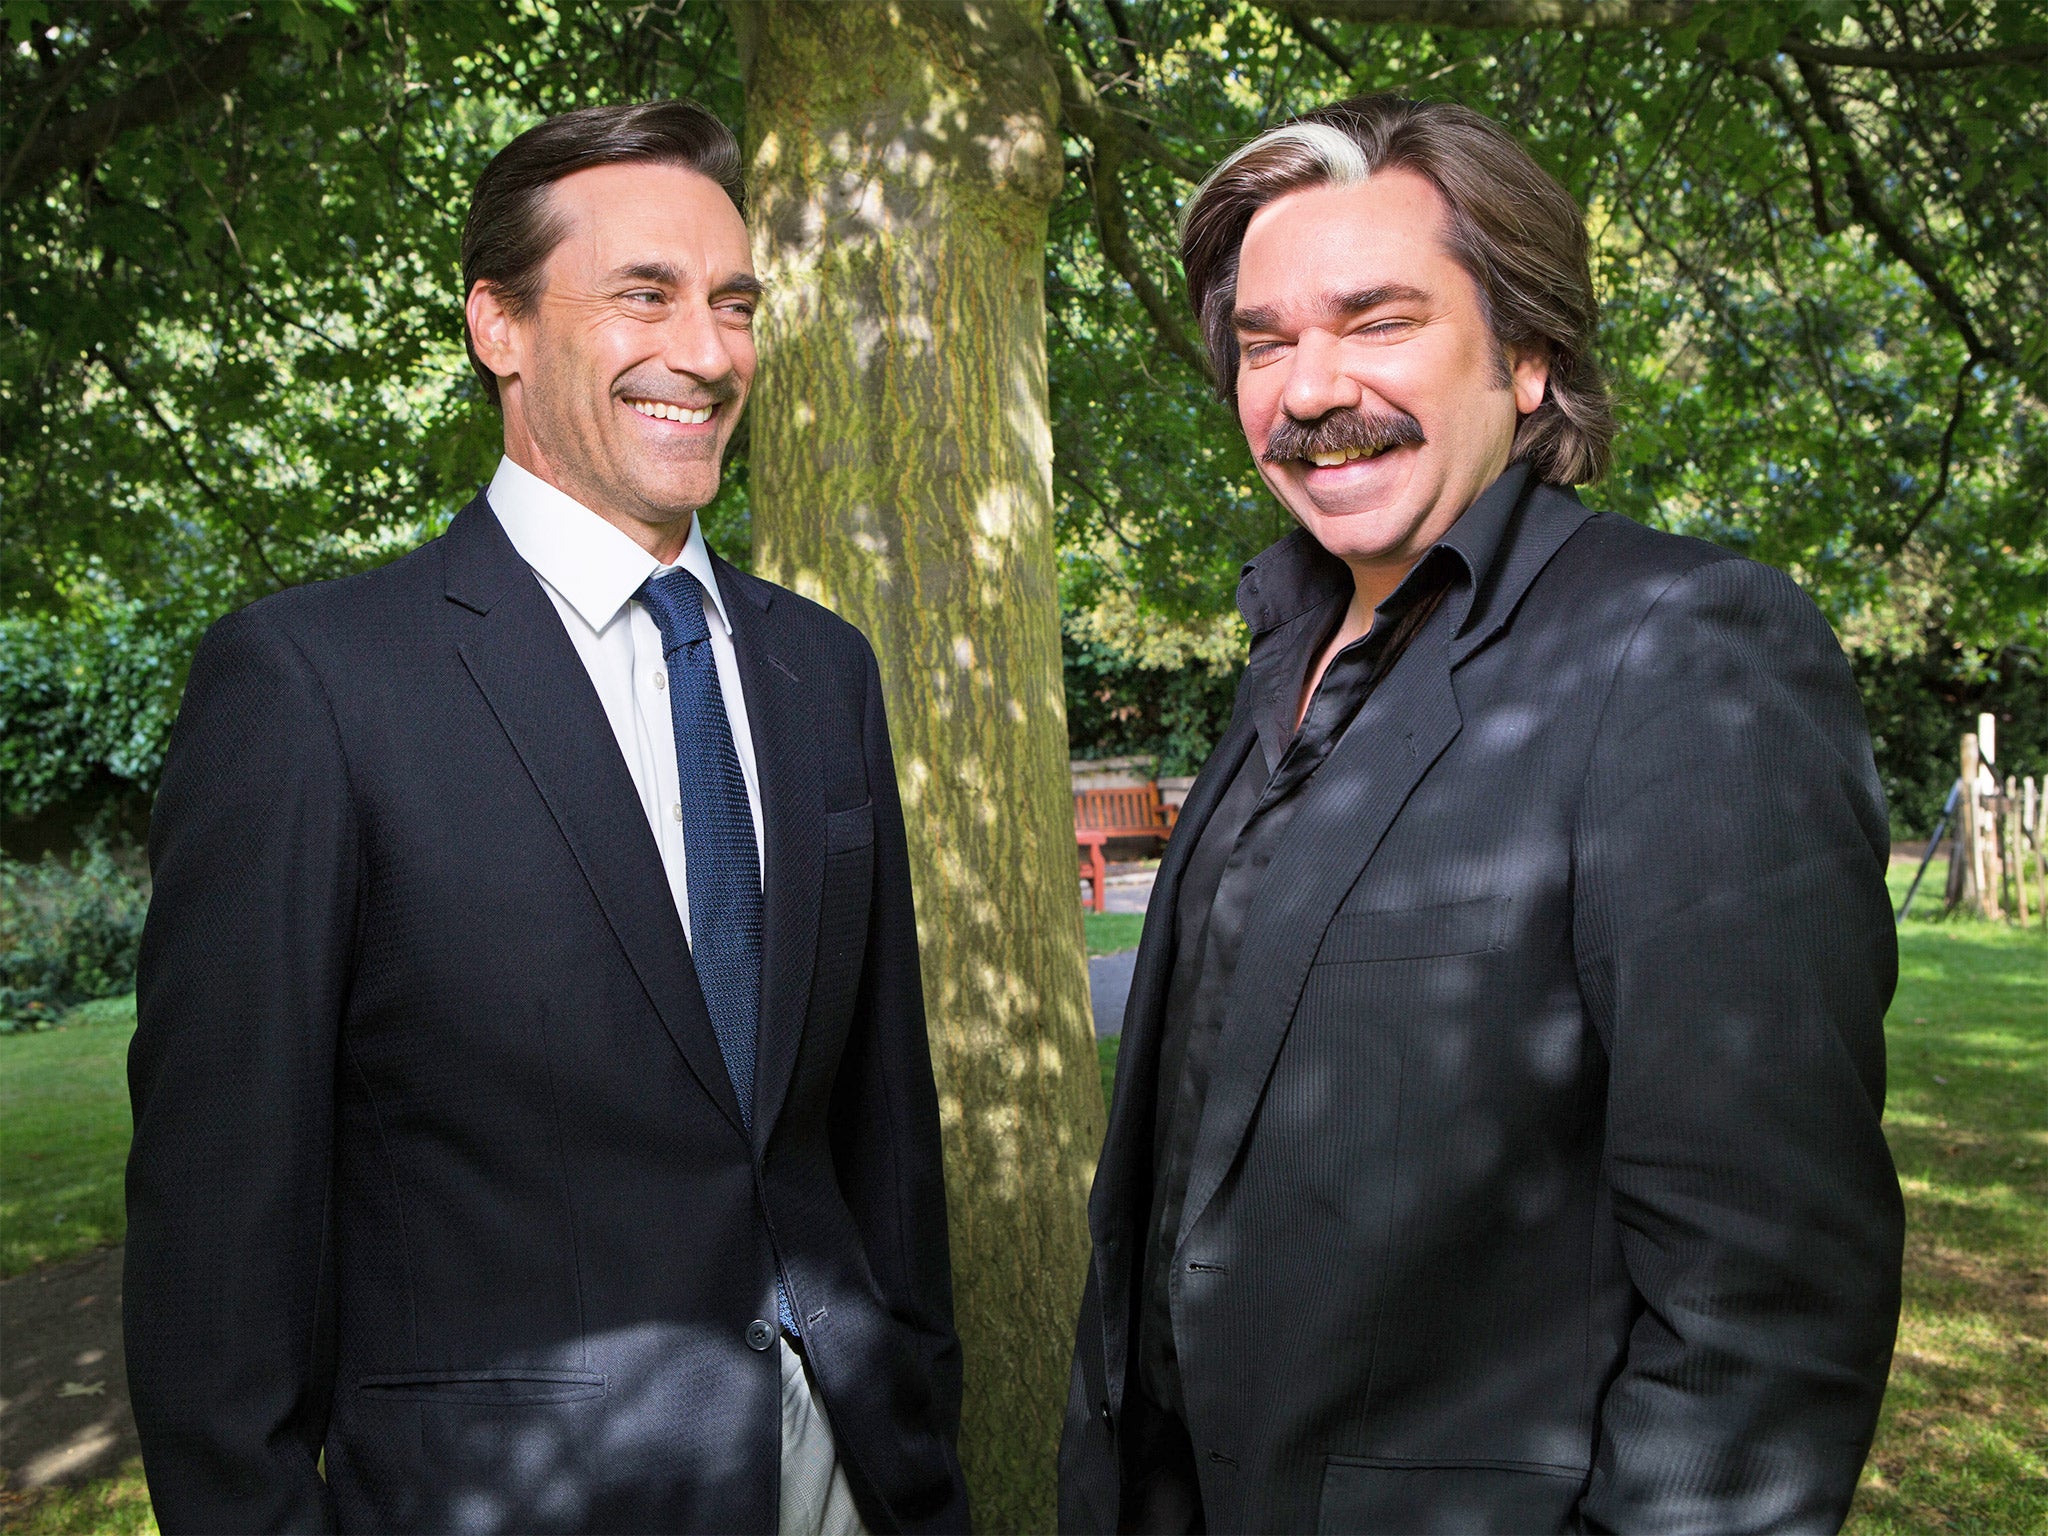 Matt Berry Interview Jon Hamm Joins The Comedian For The Latest Series Of Channel 4 Sitcom Toast Of London The Independent The Independent